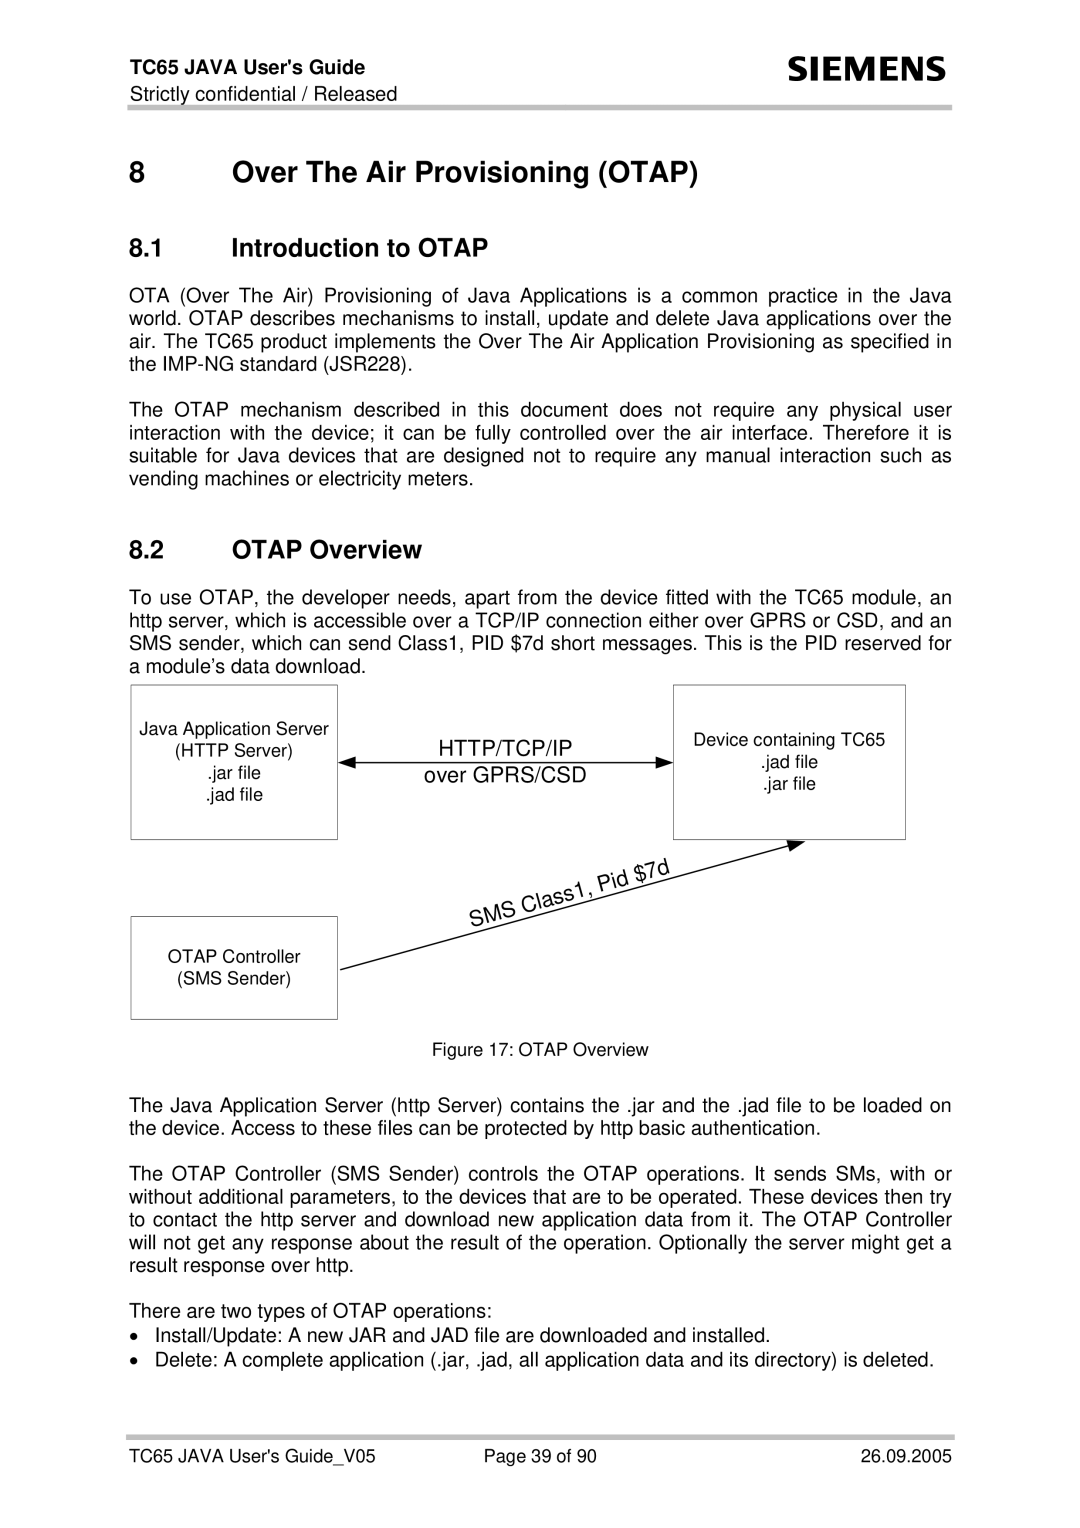 Siemens TC65 manual Over The Air Provisioning Otap, Introduction to Otap, Otap Overview 